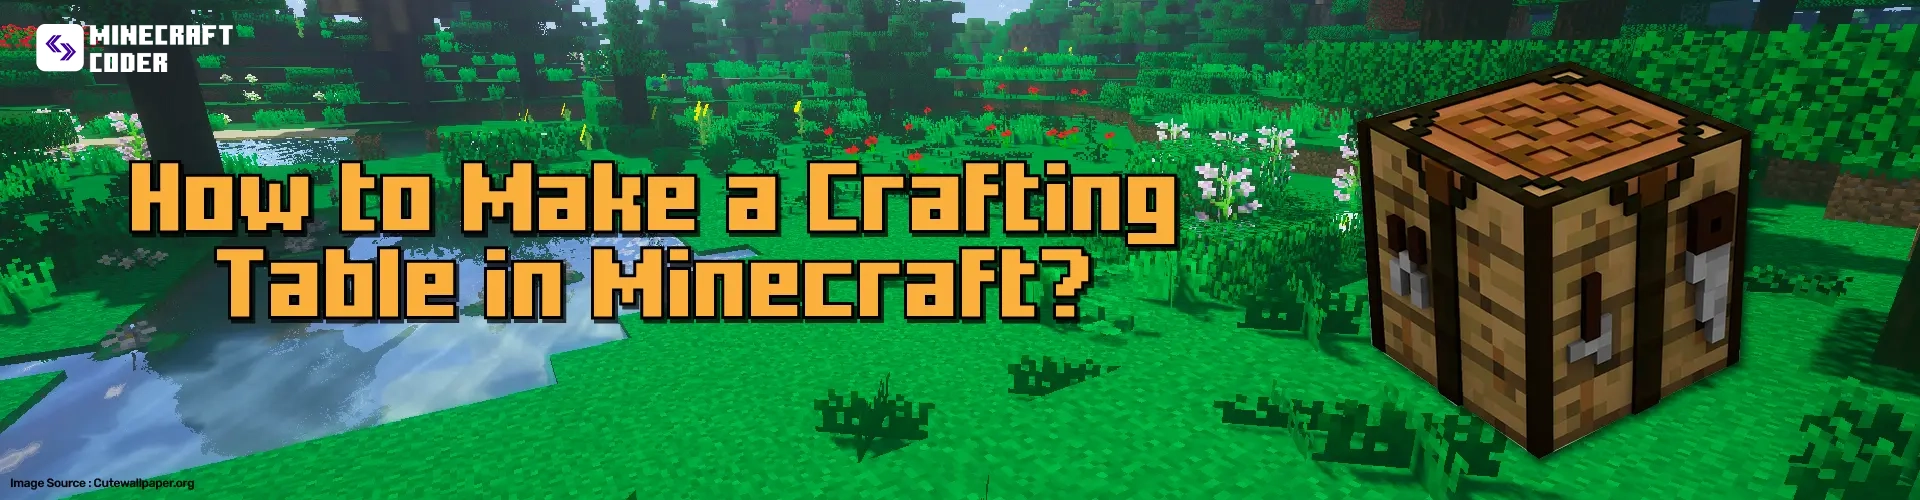 How to make a crafting table in minecraft